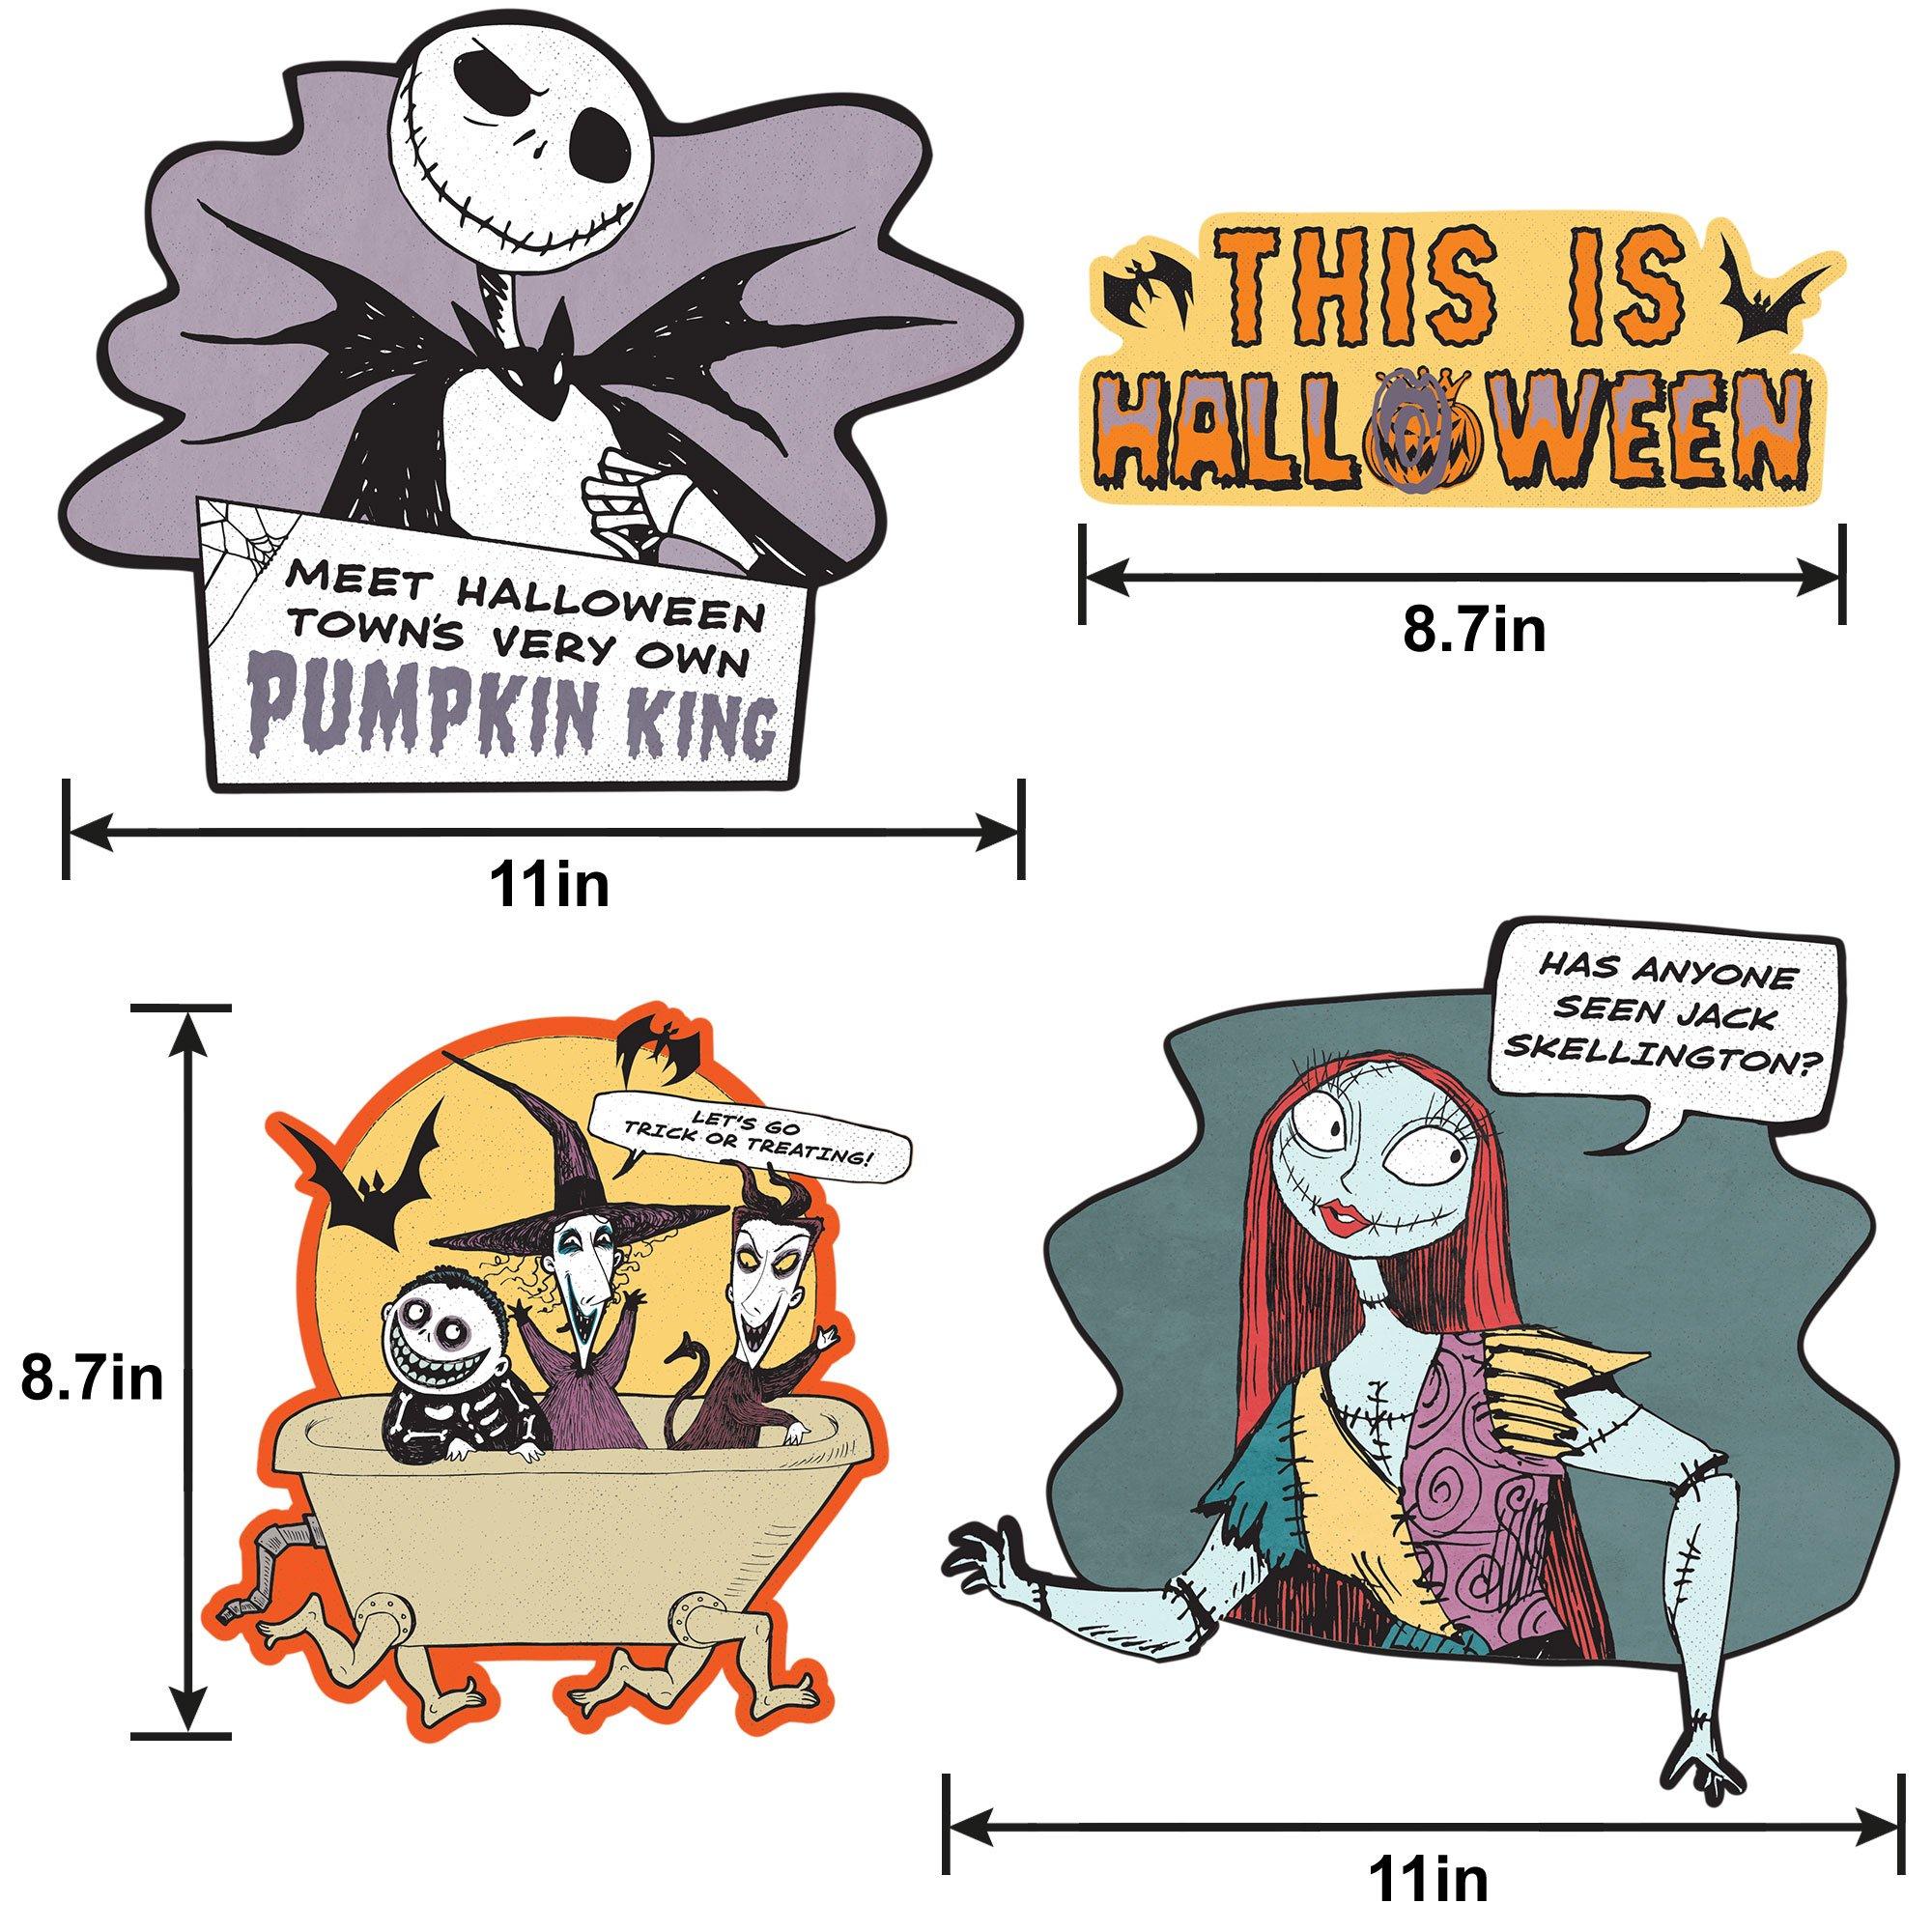 The Nightmare Before Christmas Cardstock Cutouts, 12pc